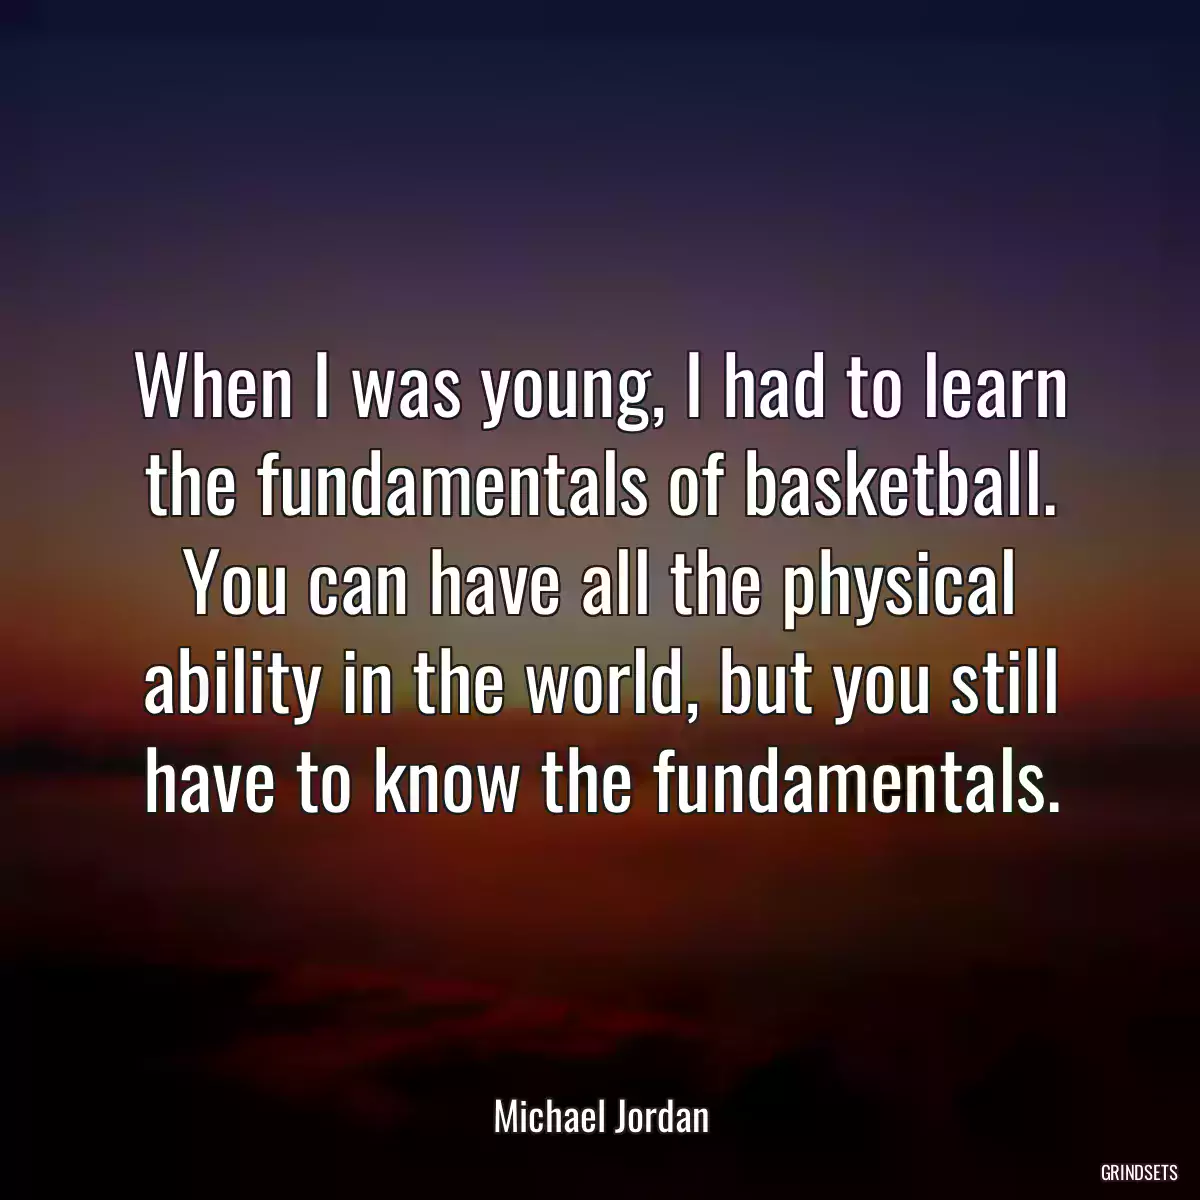 When I was young, I had to learn the fundamentals of basketball. You can have all the physical ability in the world, but you still have to know the fundamentals.